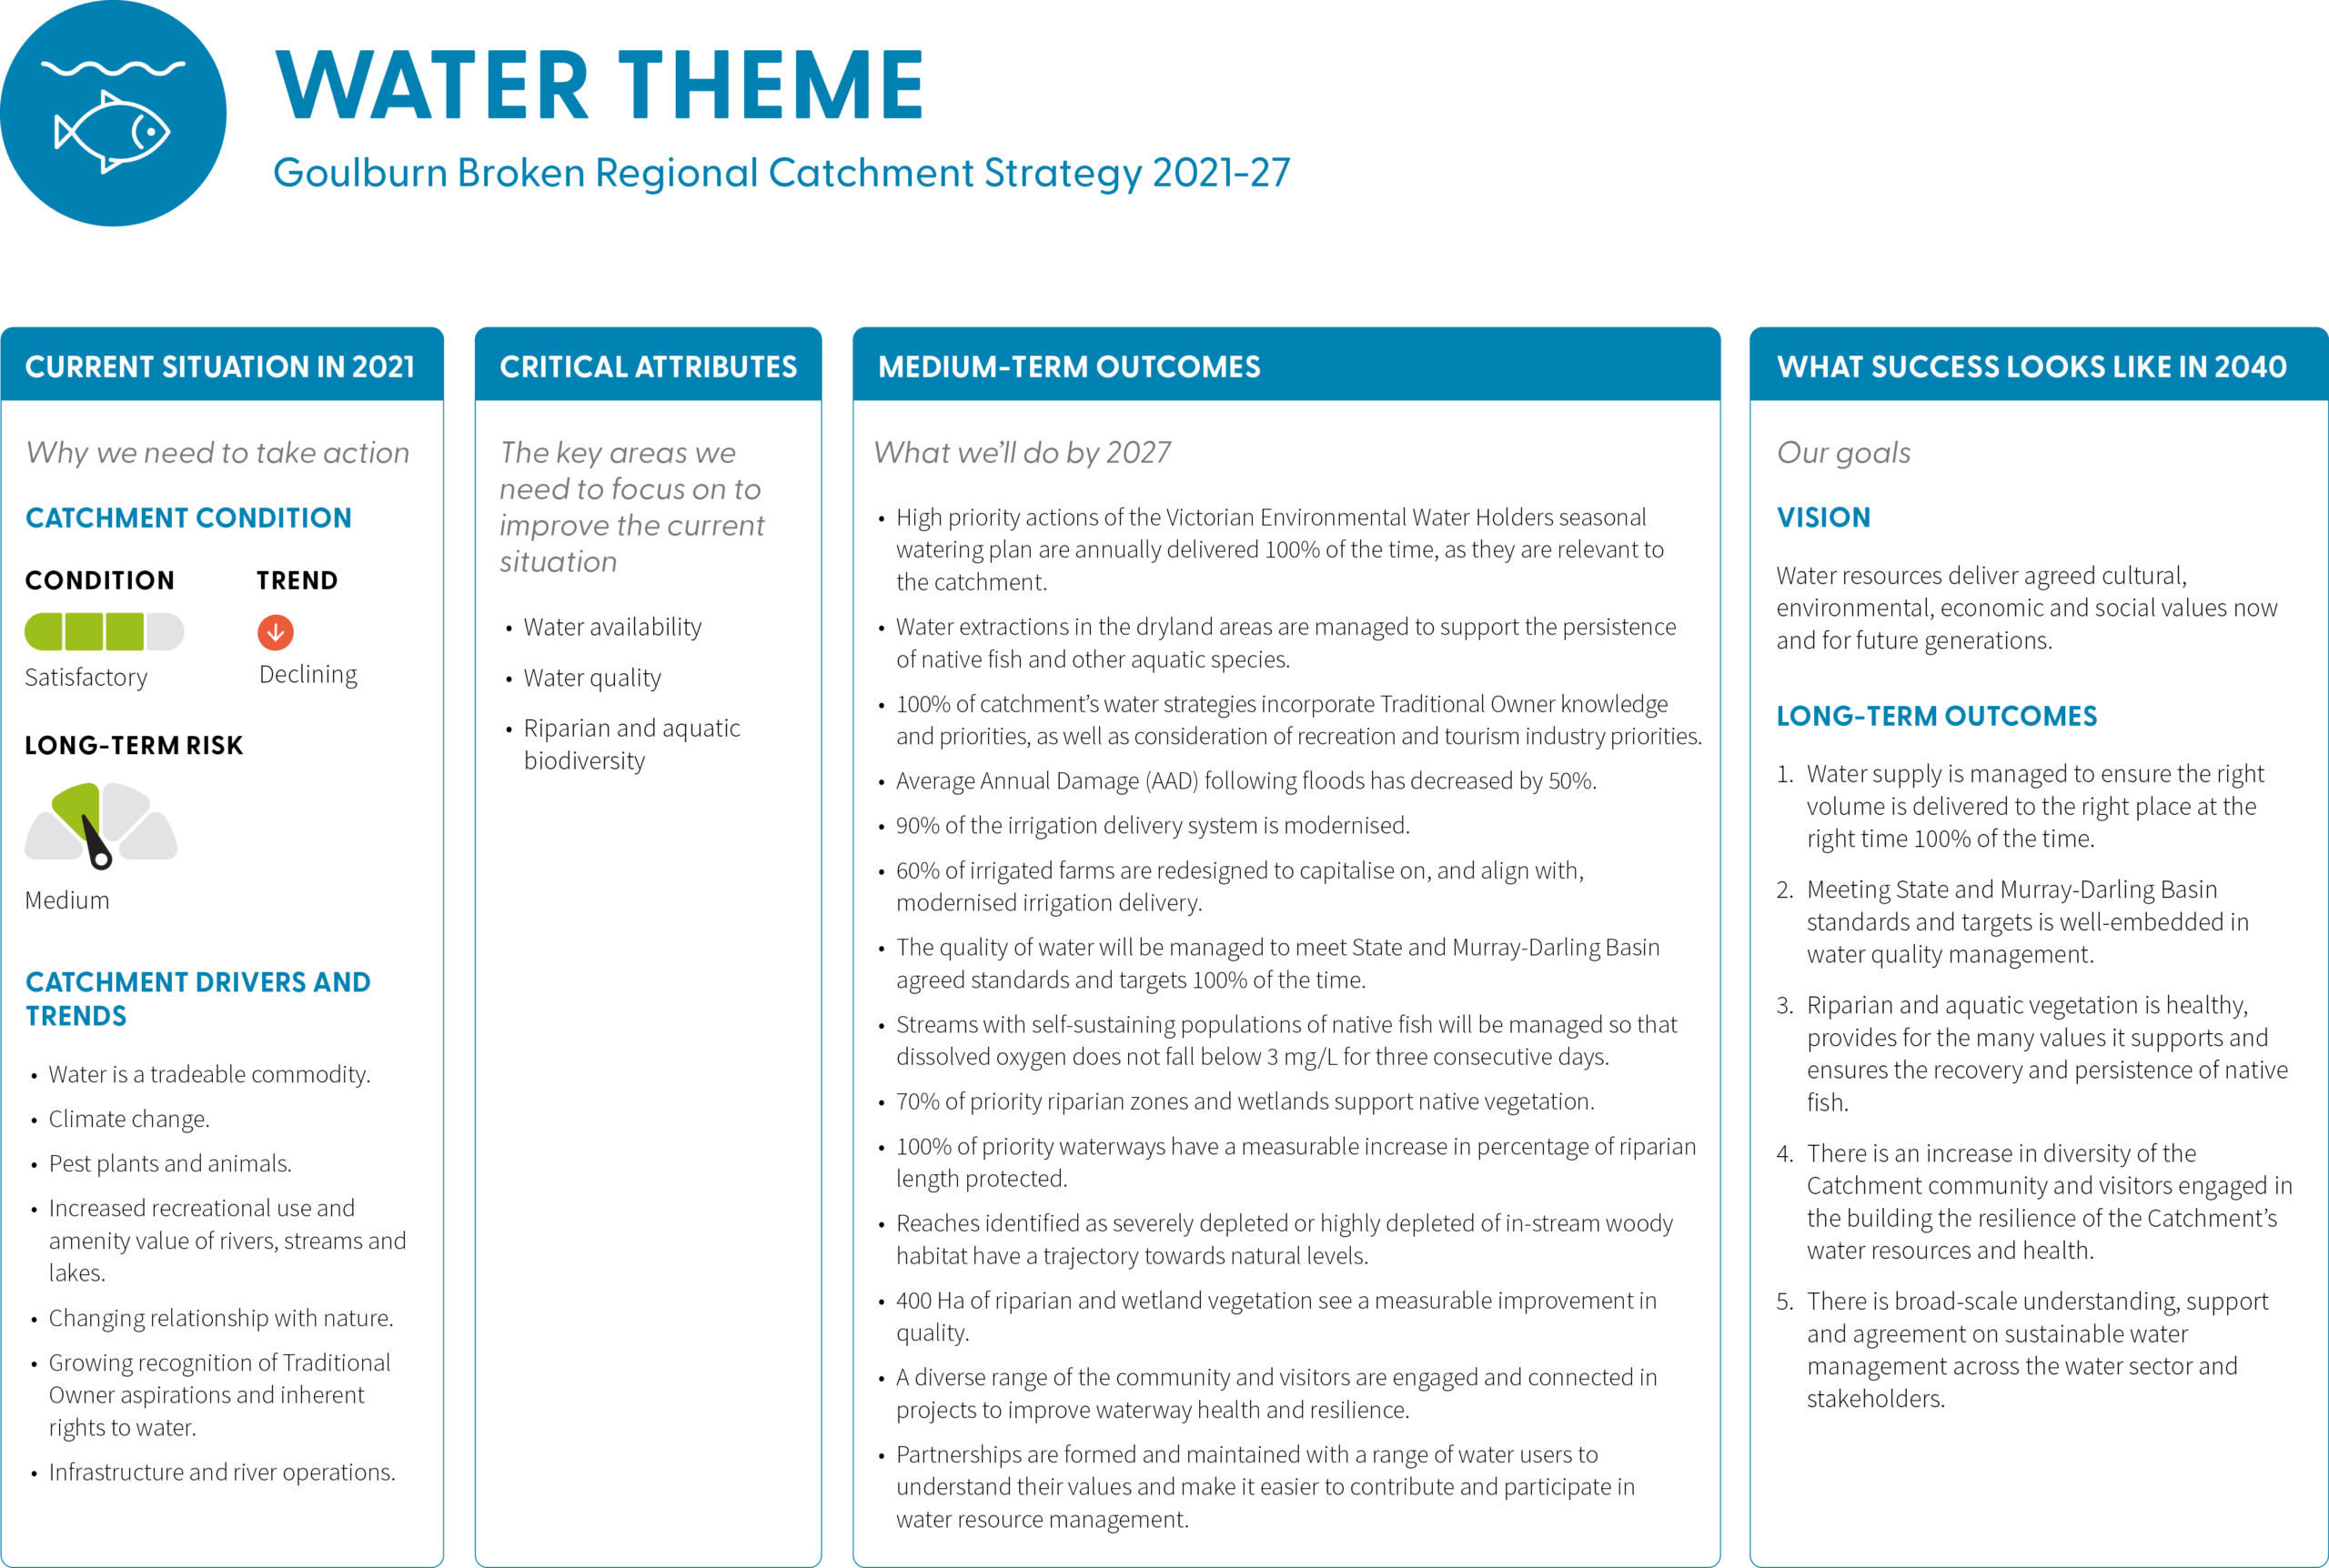 A diagram summarising the water theme content of the strategy, with four main sections: current situation in 2021, critical attributes, medium-term outcomes and what success looks like in 2040. The content of the diagram is described in the information below the diagram.